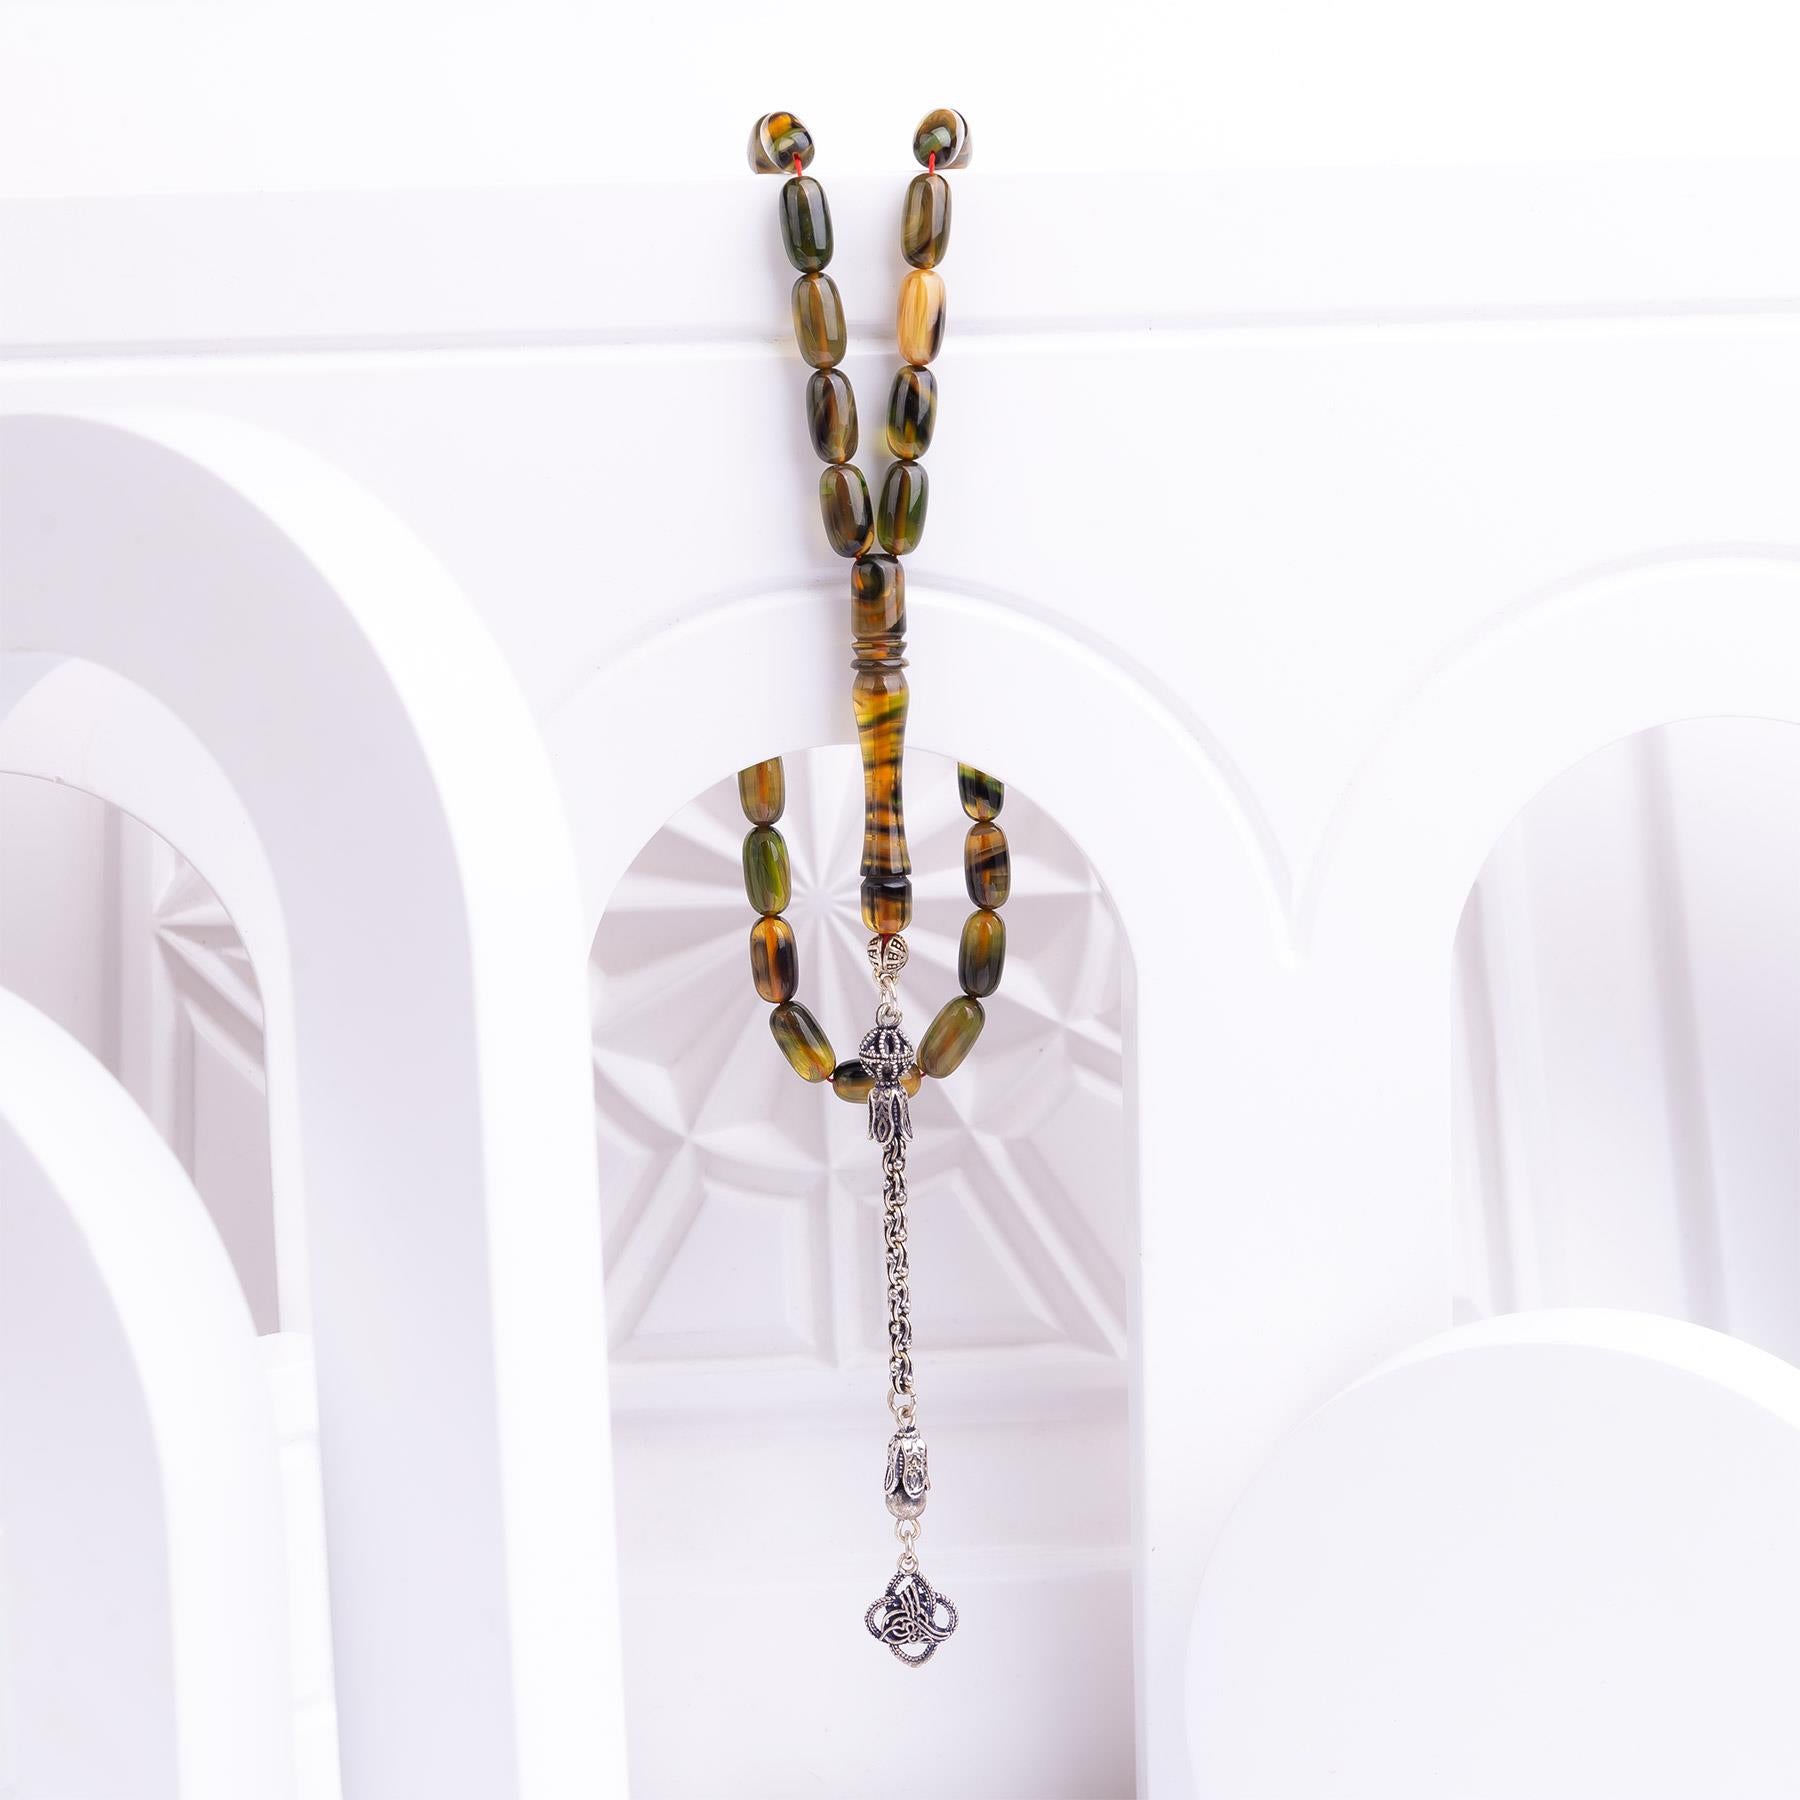 Ve Tesbih Fire Amber Rosary with Silver Tassels 2